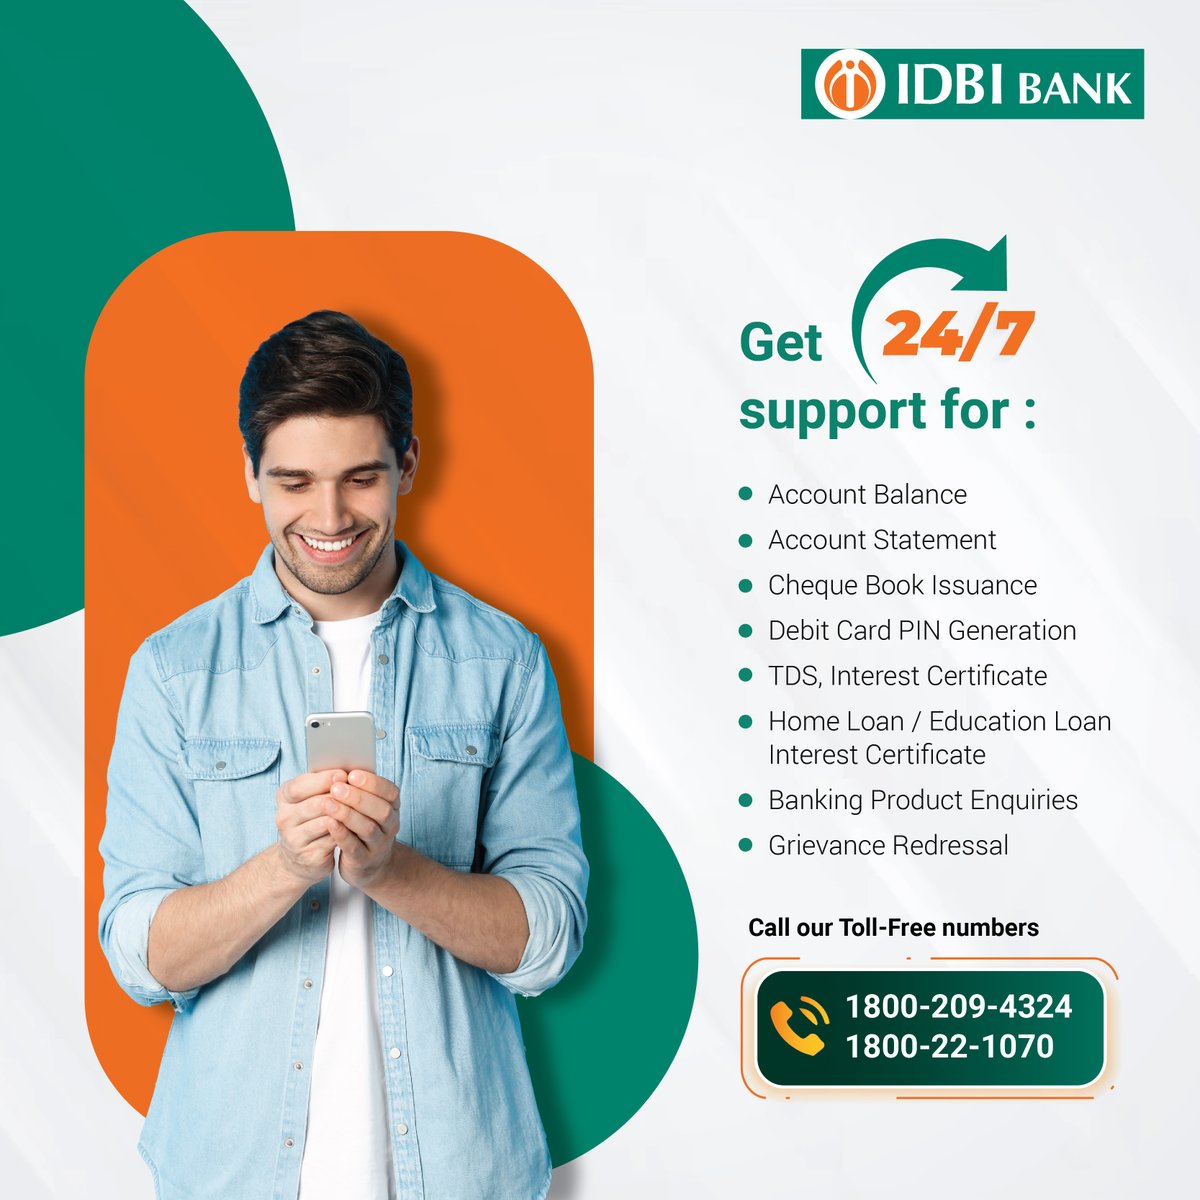 Get 24/7 assistance on our Toll-Free numbers for the mentioned services. #CustomerGrievances #GrievanceRedressal #CustomerCare #IDBIBank